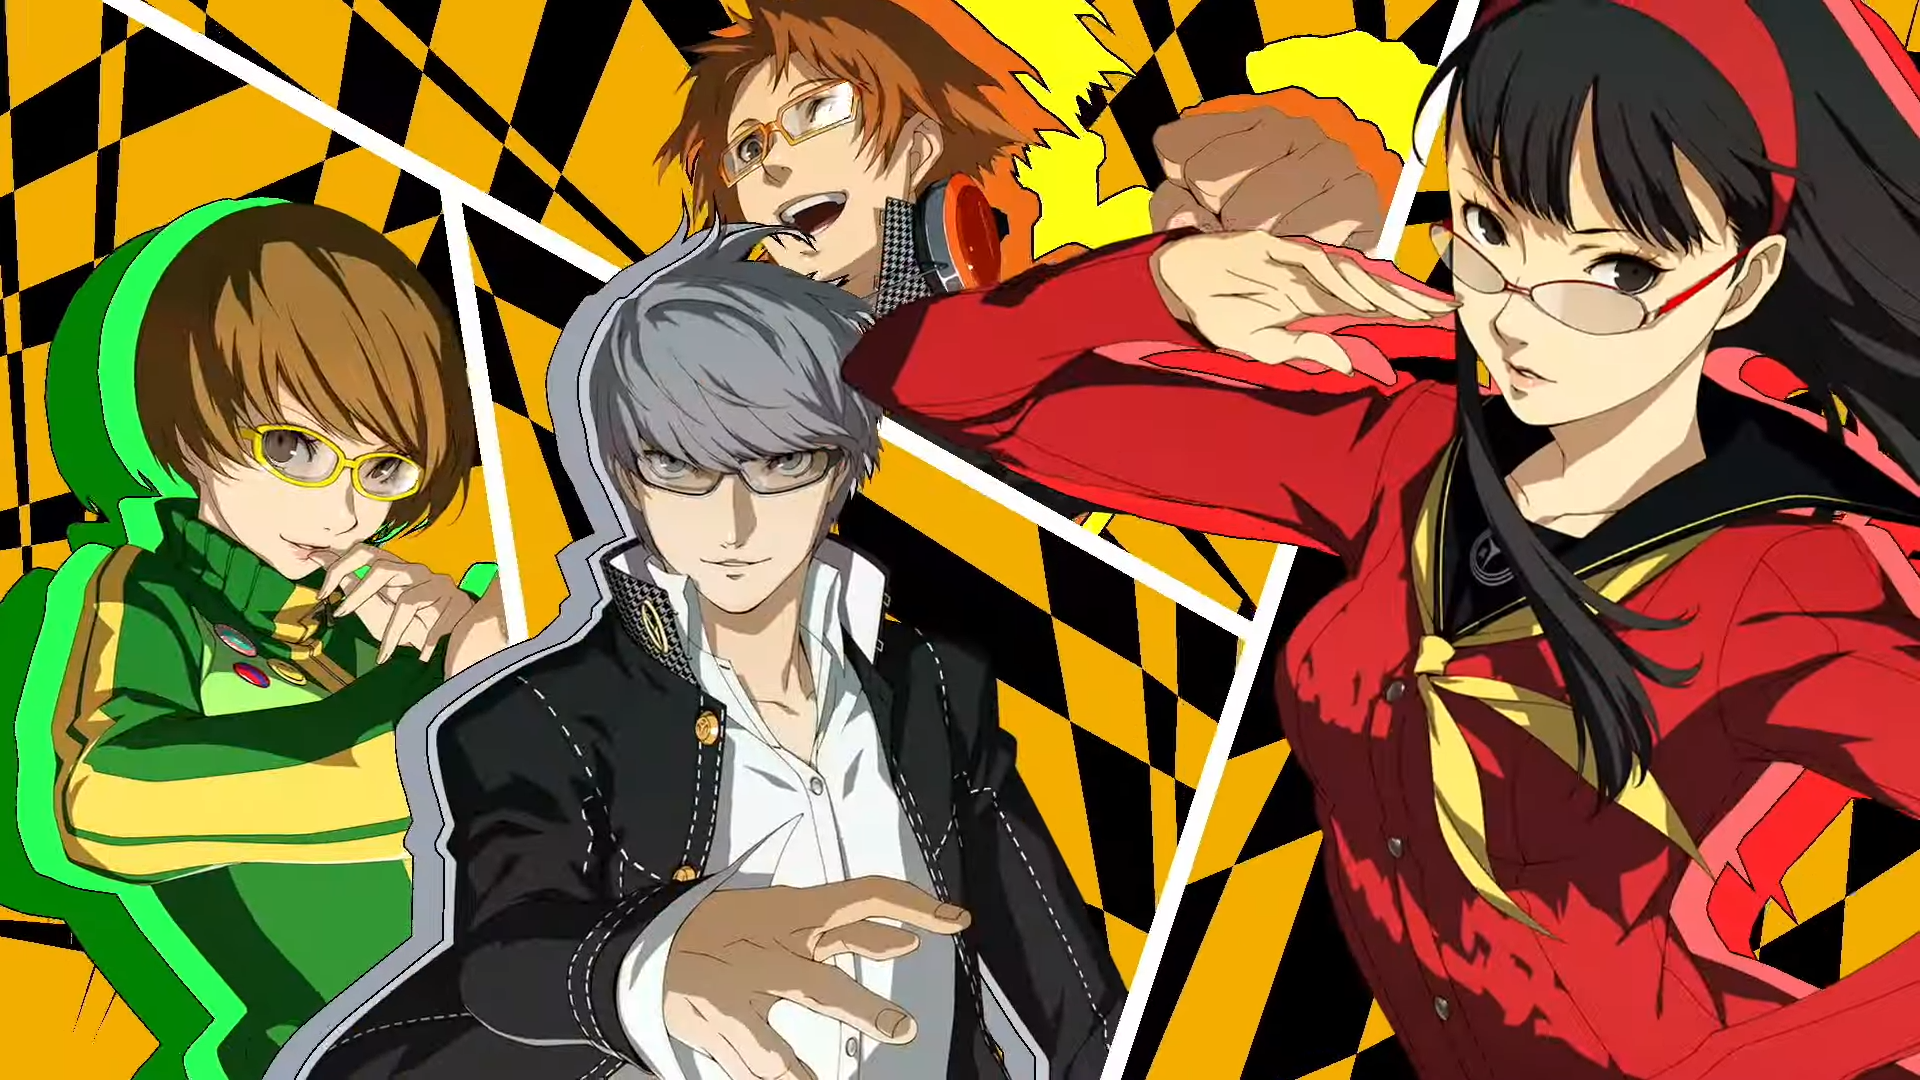 Persona 5 Royal, Persona 4 Golden, and Persona 3 Portable to be released on PC and Xbox